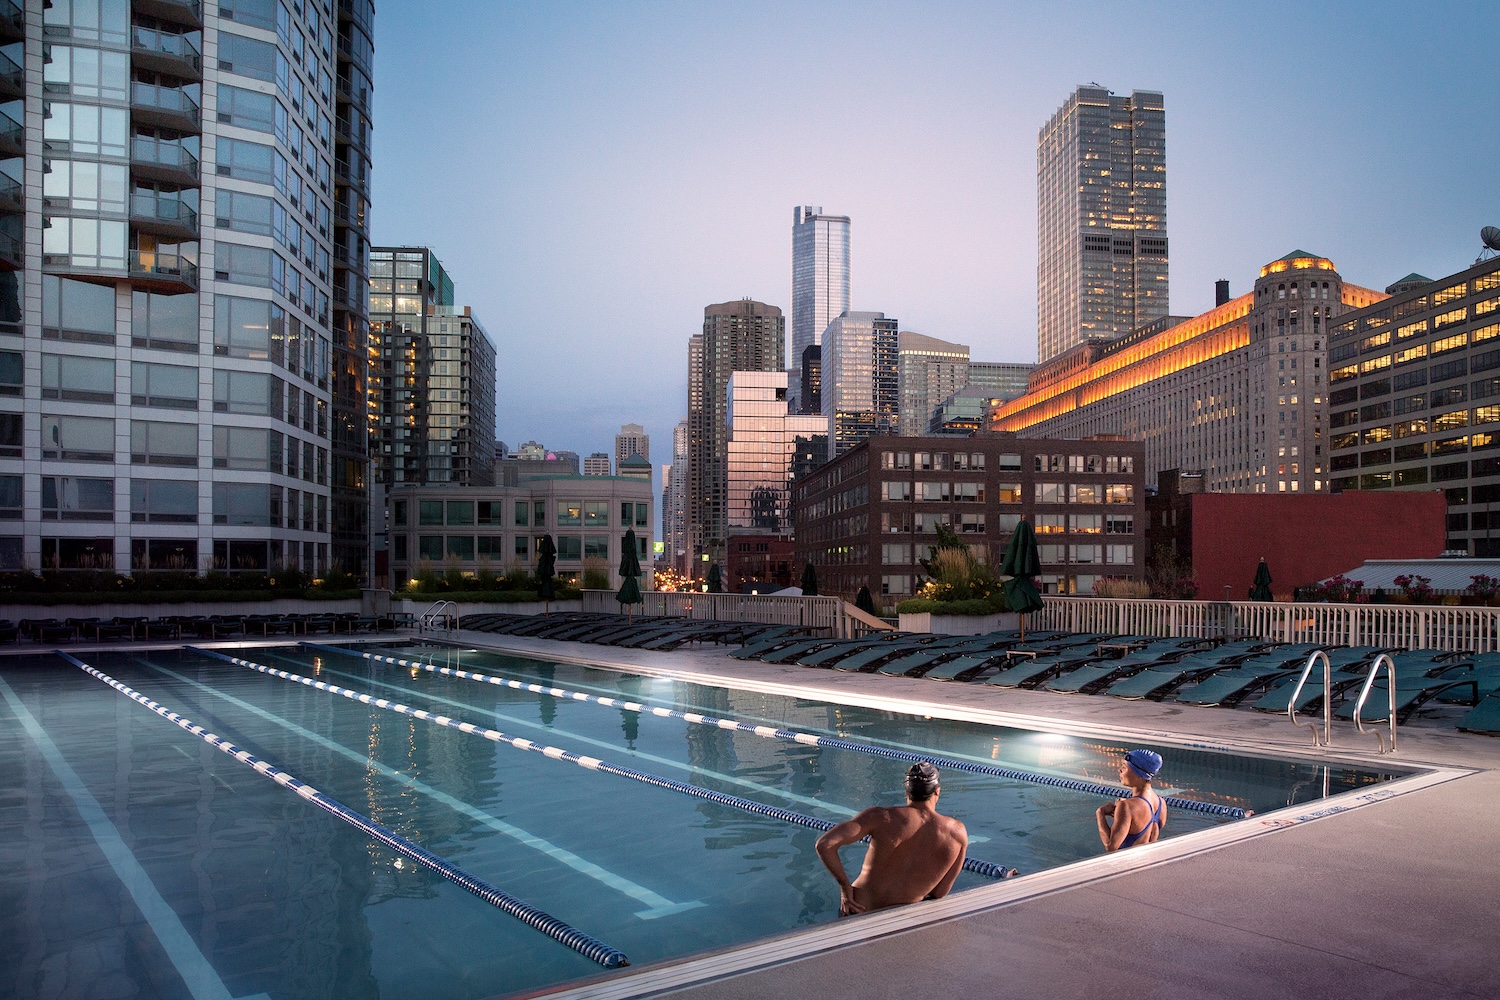 man and woman at edge of pool, buildings and skylines